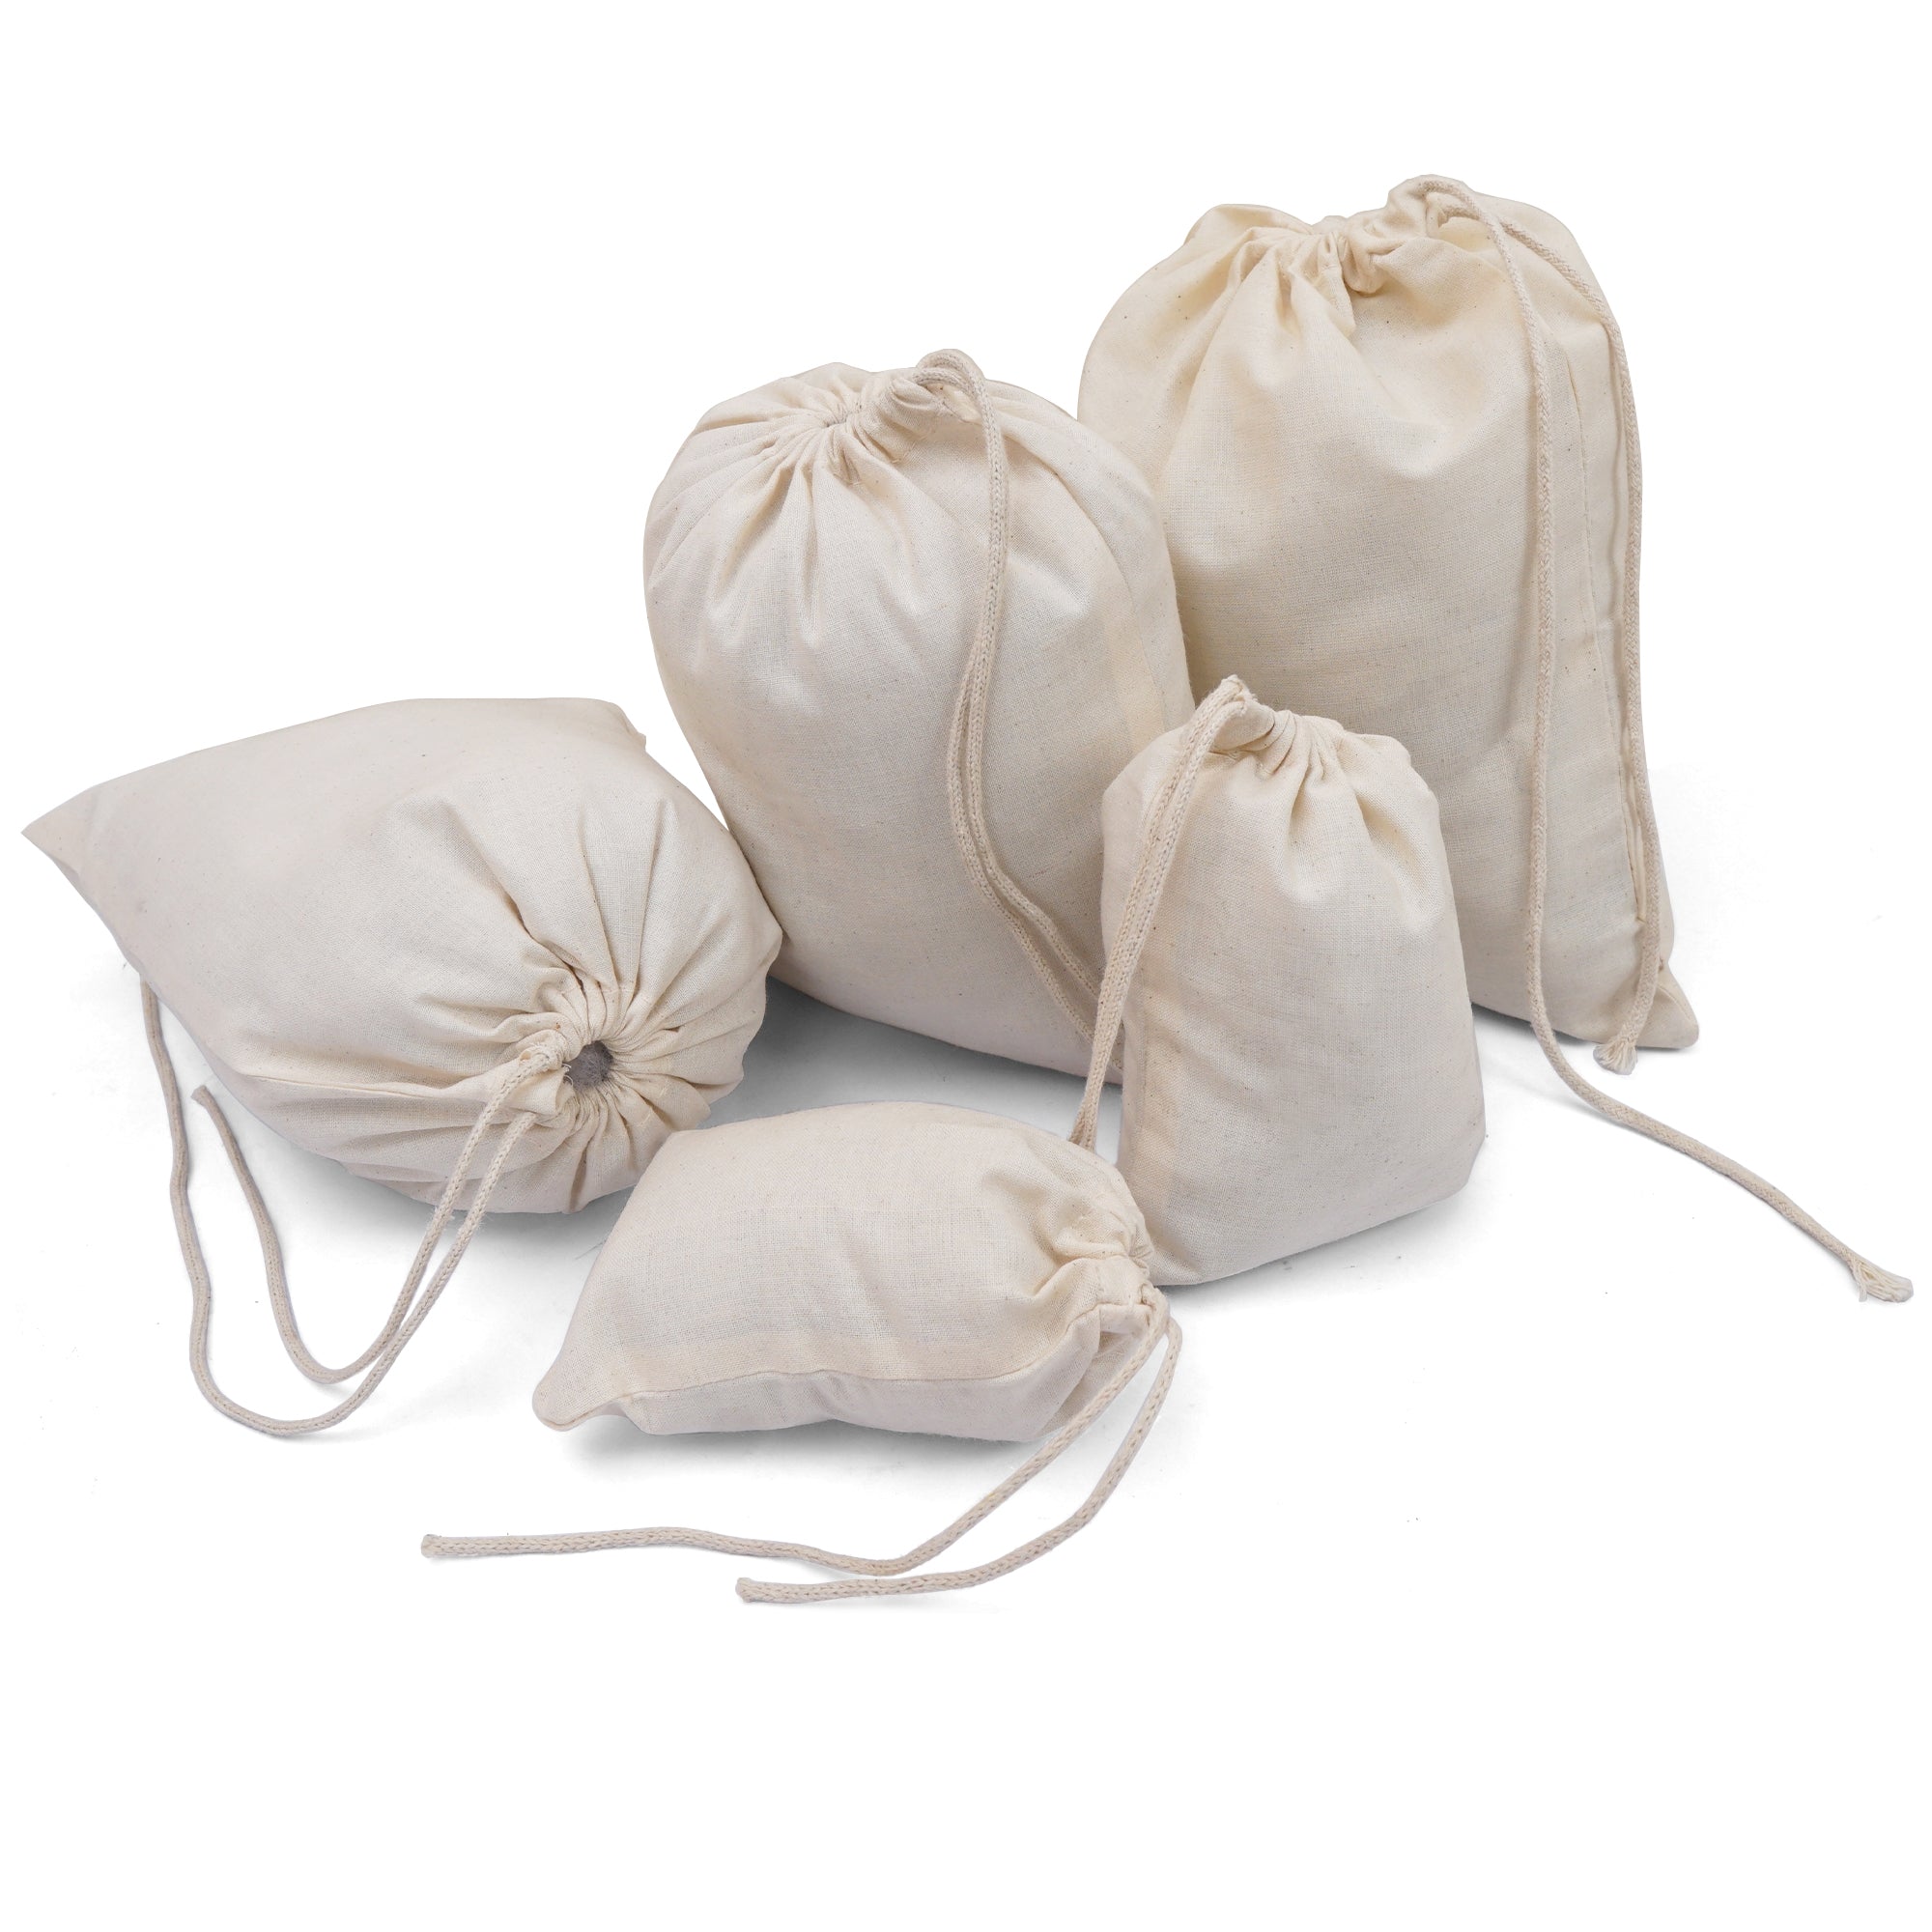 Fabric Bags  100% Cotton